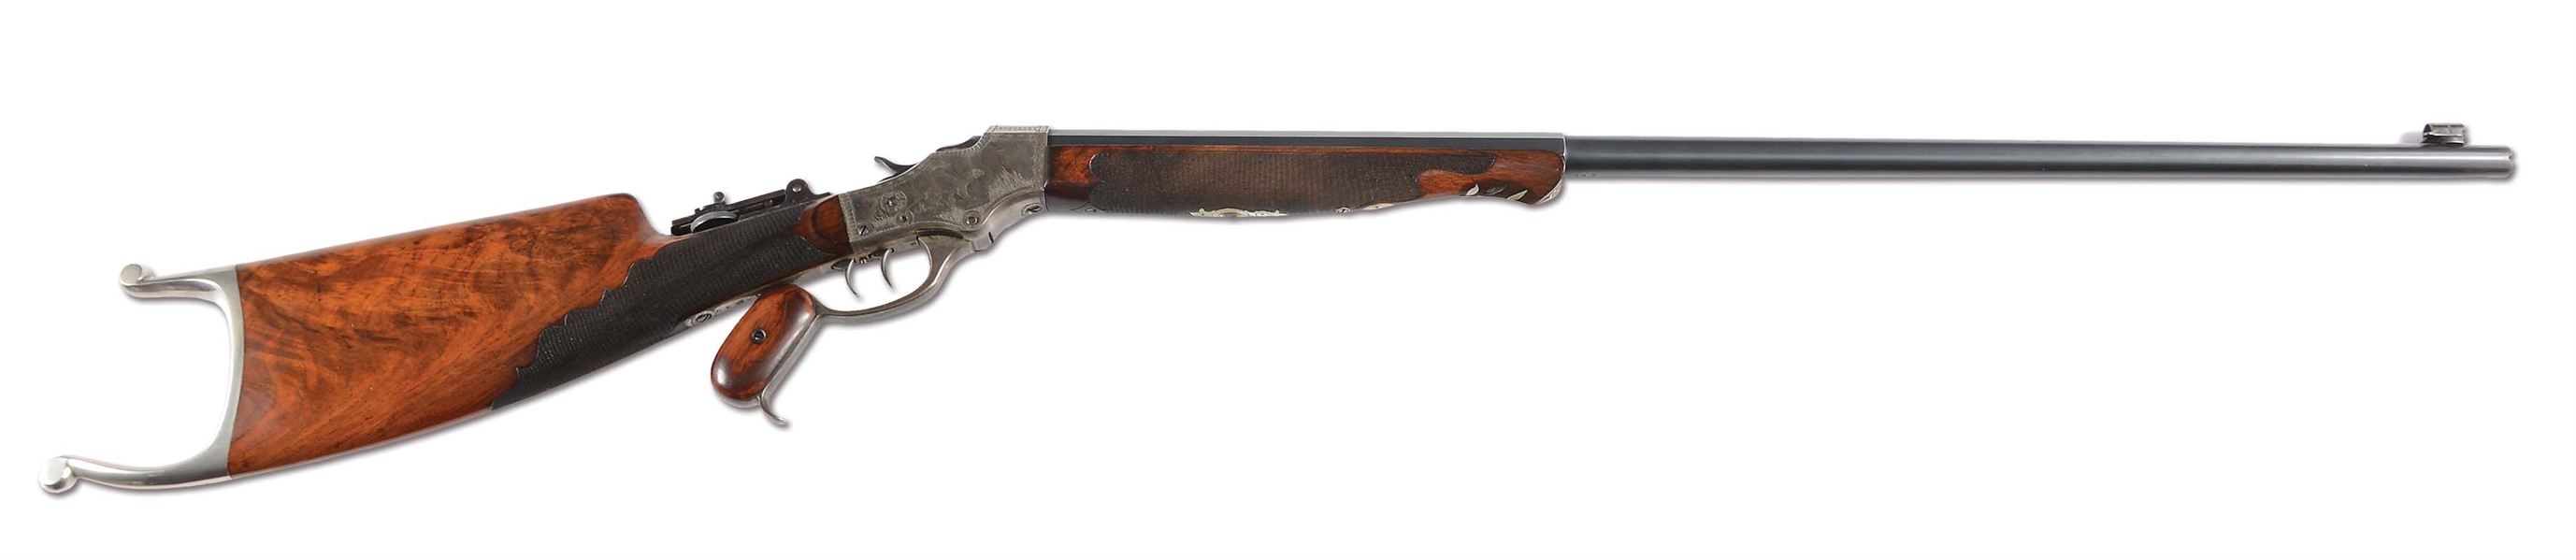 (C) J. STEVENS IDEAL "SCHUETZEN SPECIAL" NO. 54 - 44 1/2 FALLING BLOCK RIFLE WITH UNUSUAL TURKEY AND MOUNTAIN LION ENGRAVING AND 2/3 ROUND, 1/3 OCTAGON BARREL.